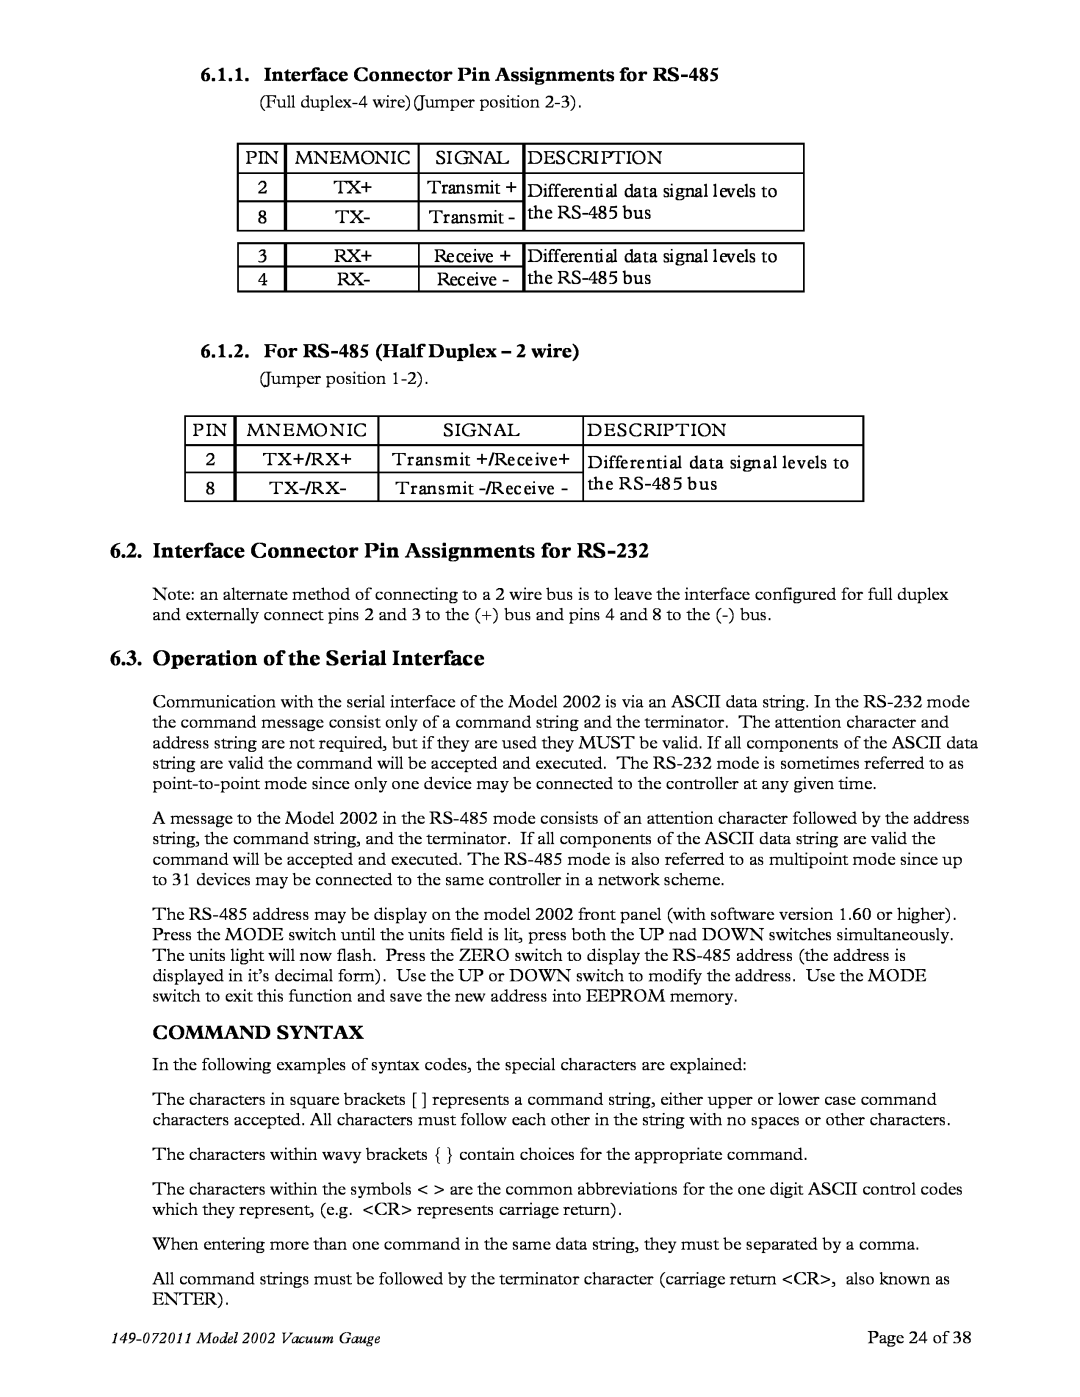 Teledyne 2002 Interface Connector Pin Assignments for RS-232, Operation of the Serial Interface, Command Syntax 